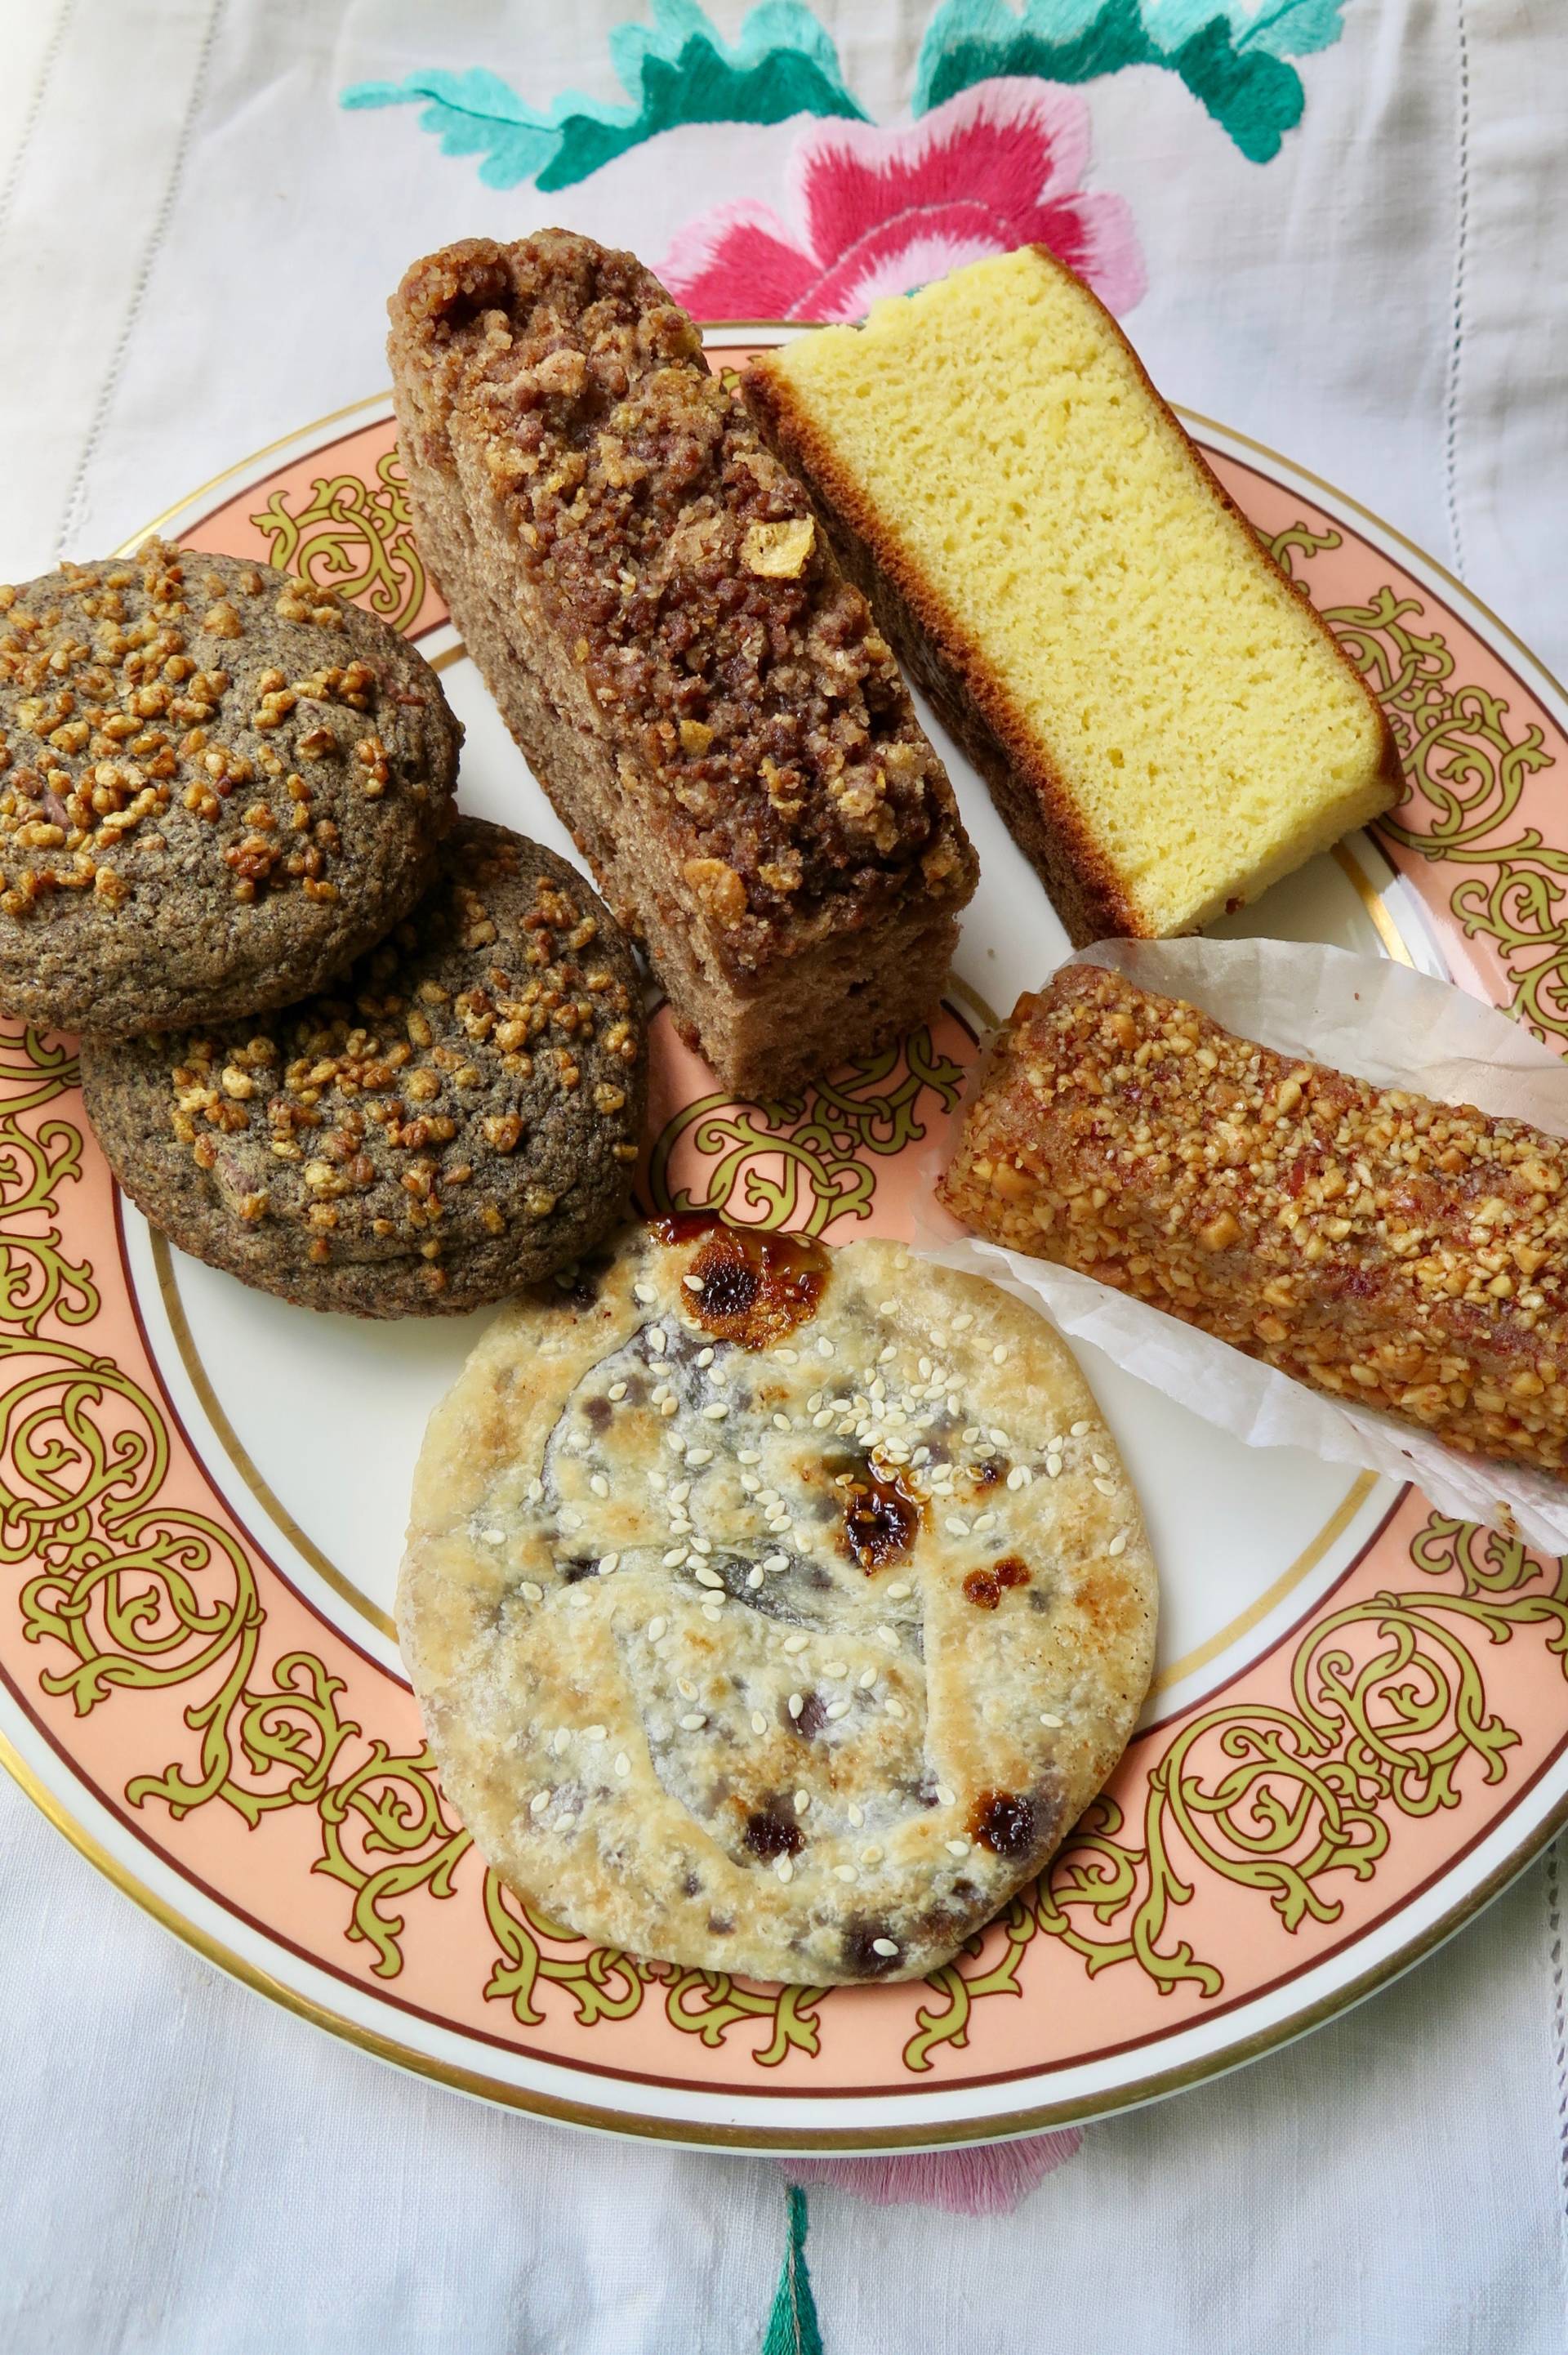 A sampling of baked goods in the Pastry Box from Breadbelly.